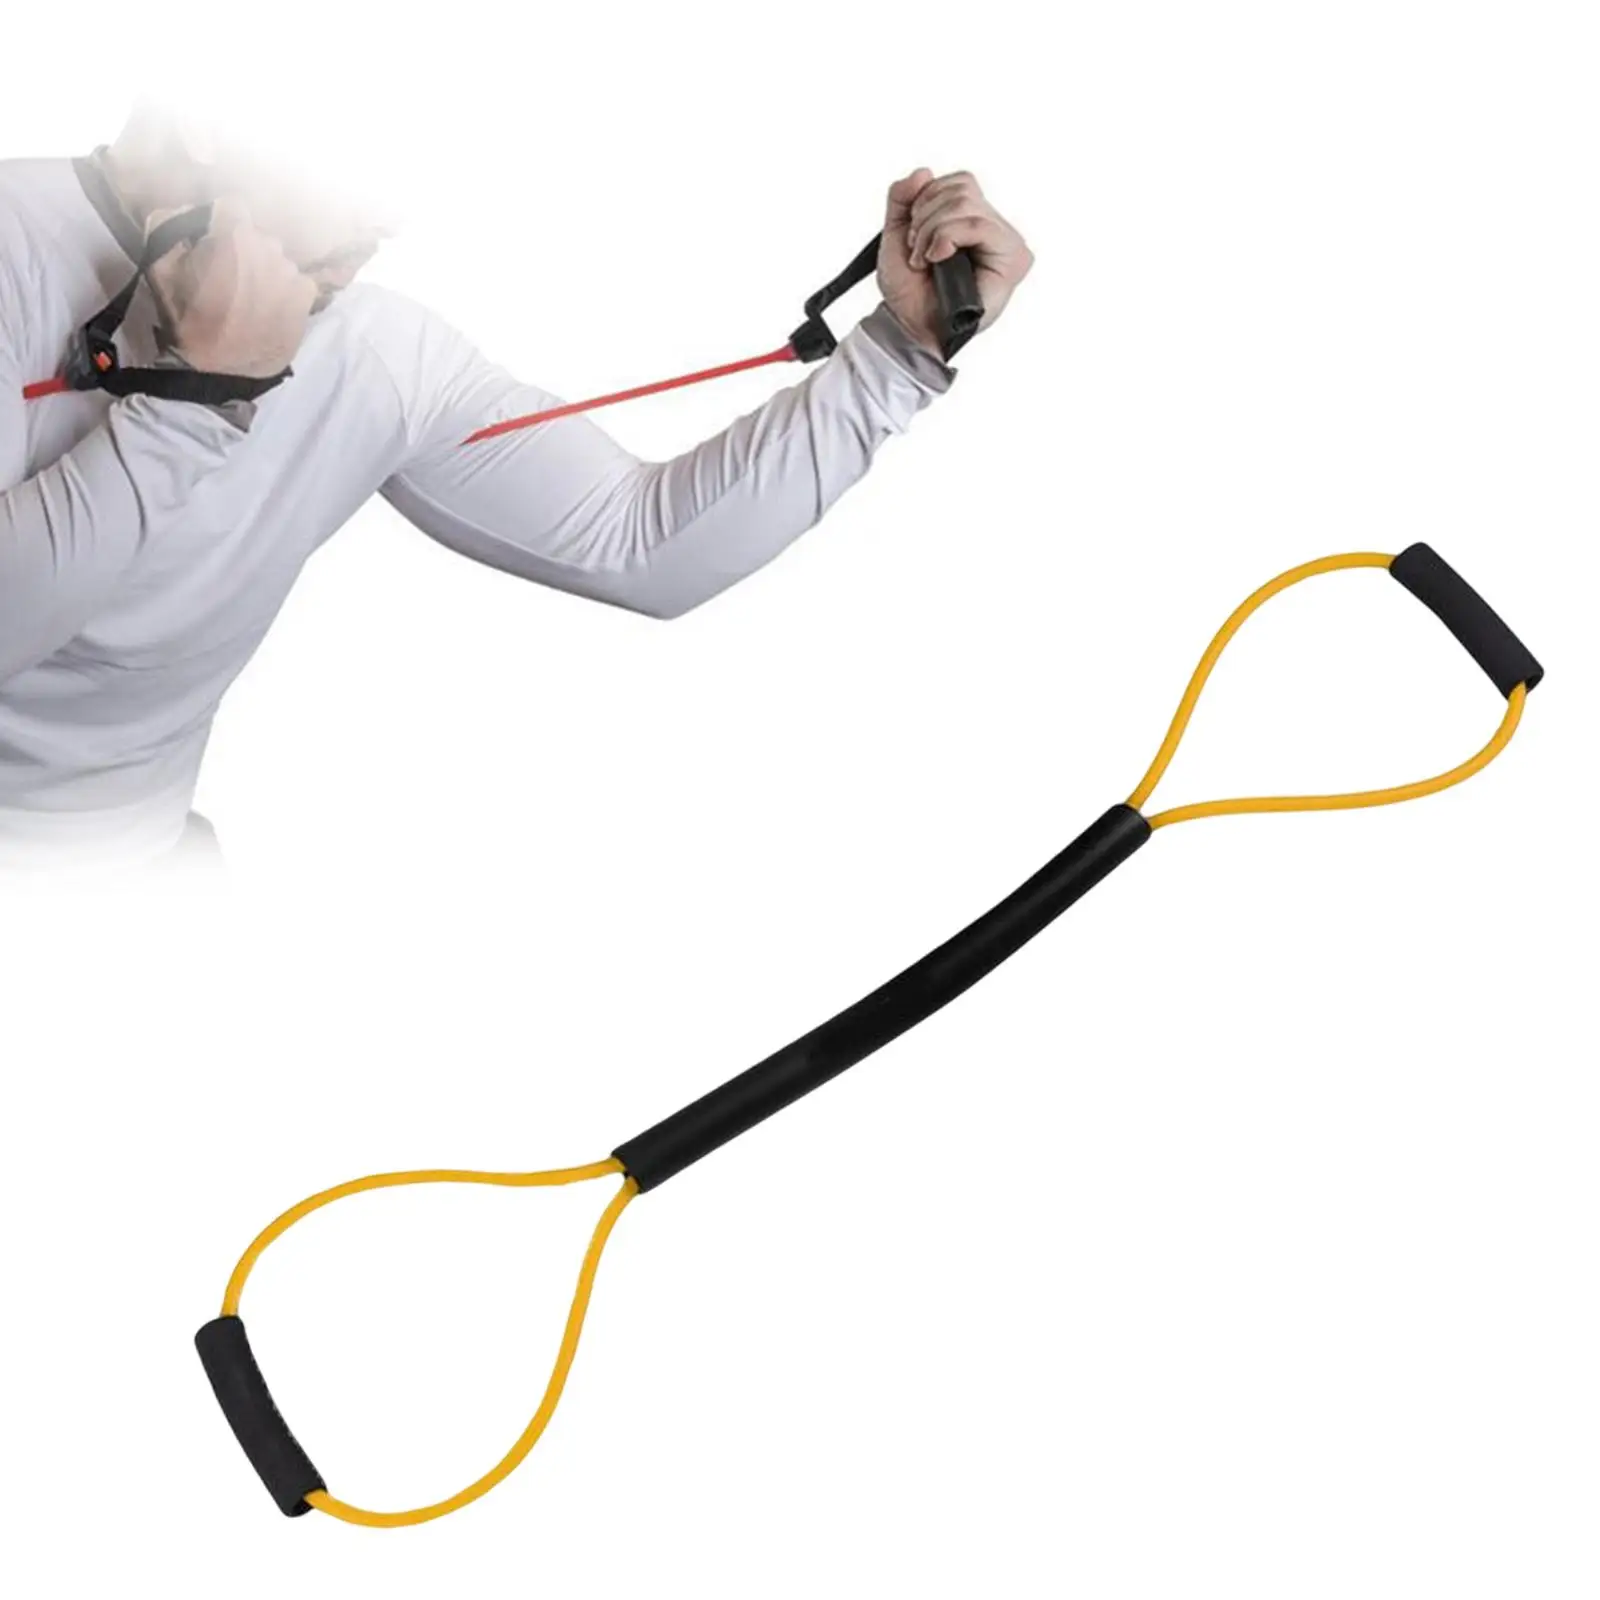 Resistance Bands Shadow Boxing Workout Karate Arm Strength Training Exercise